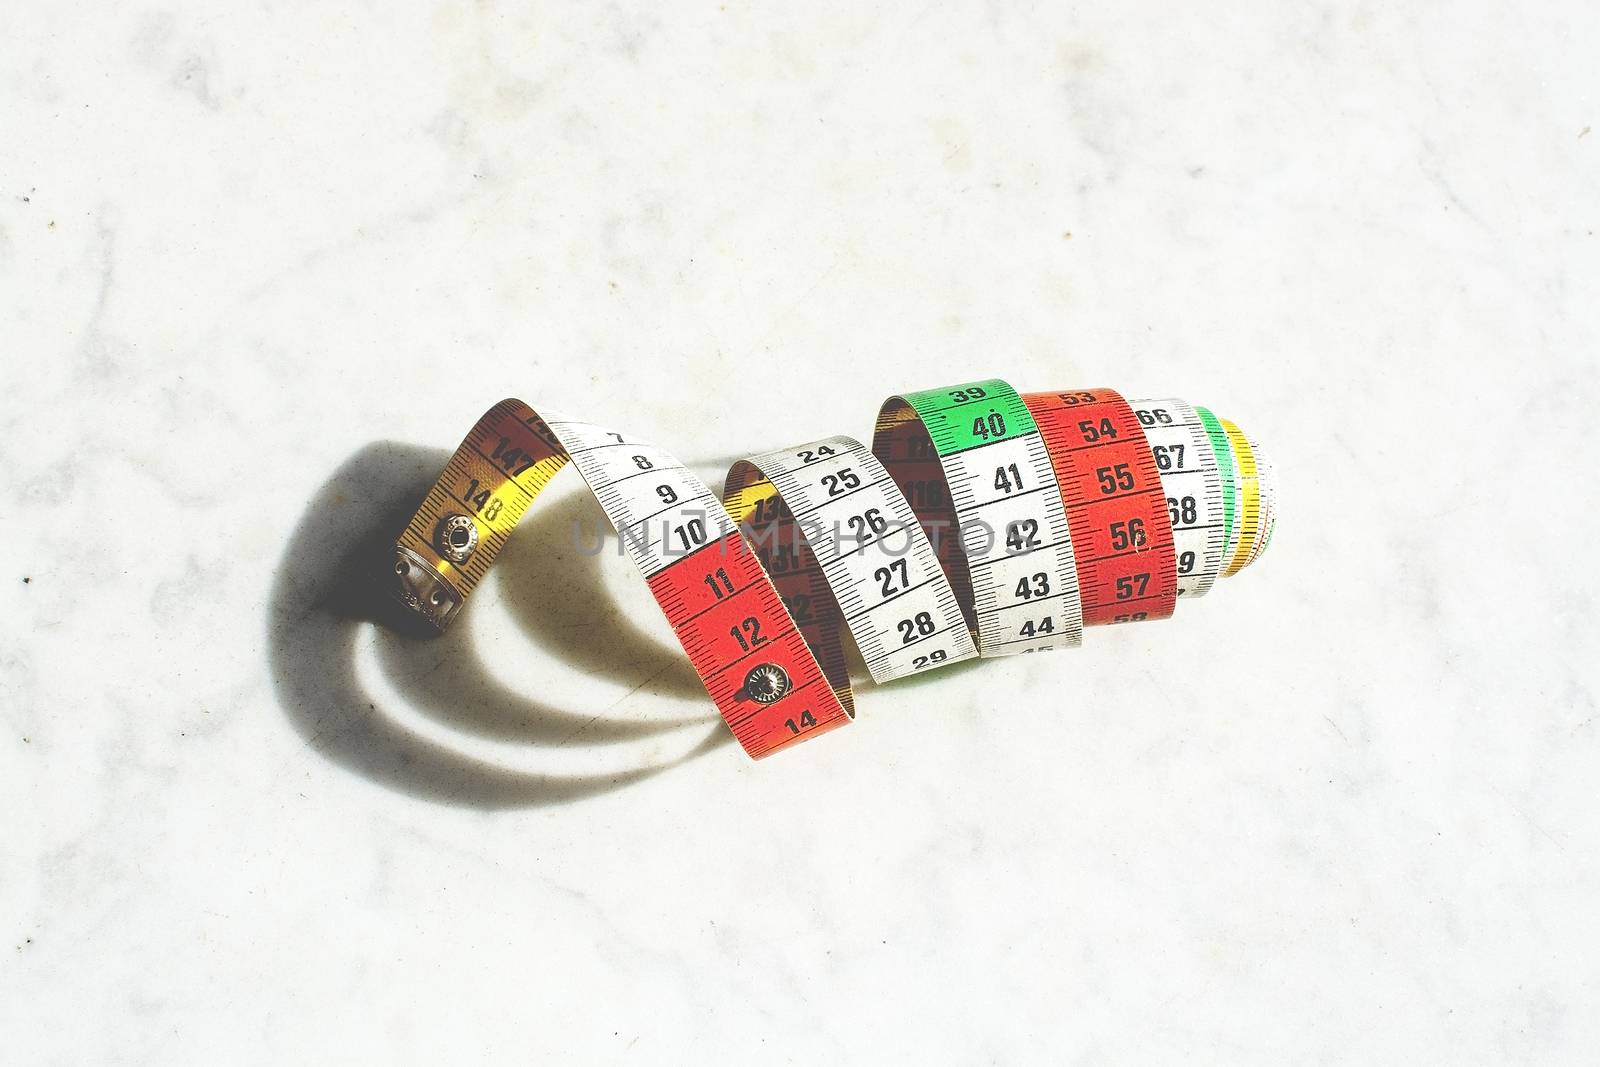 Colorful measuring tape metric system rolled up  by ArtesiaWells